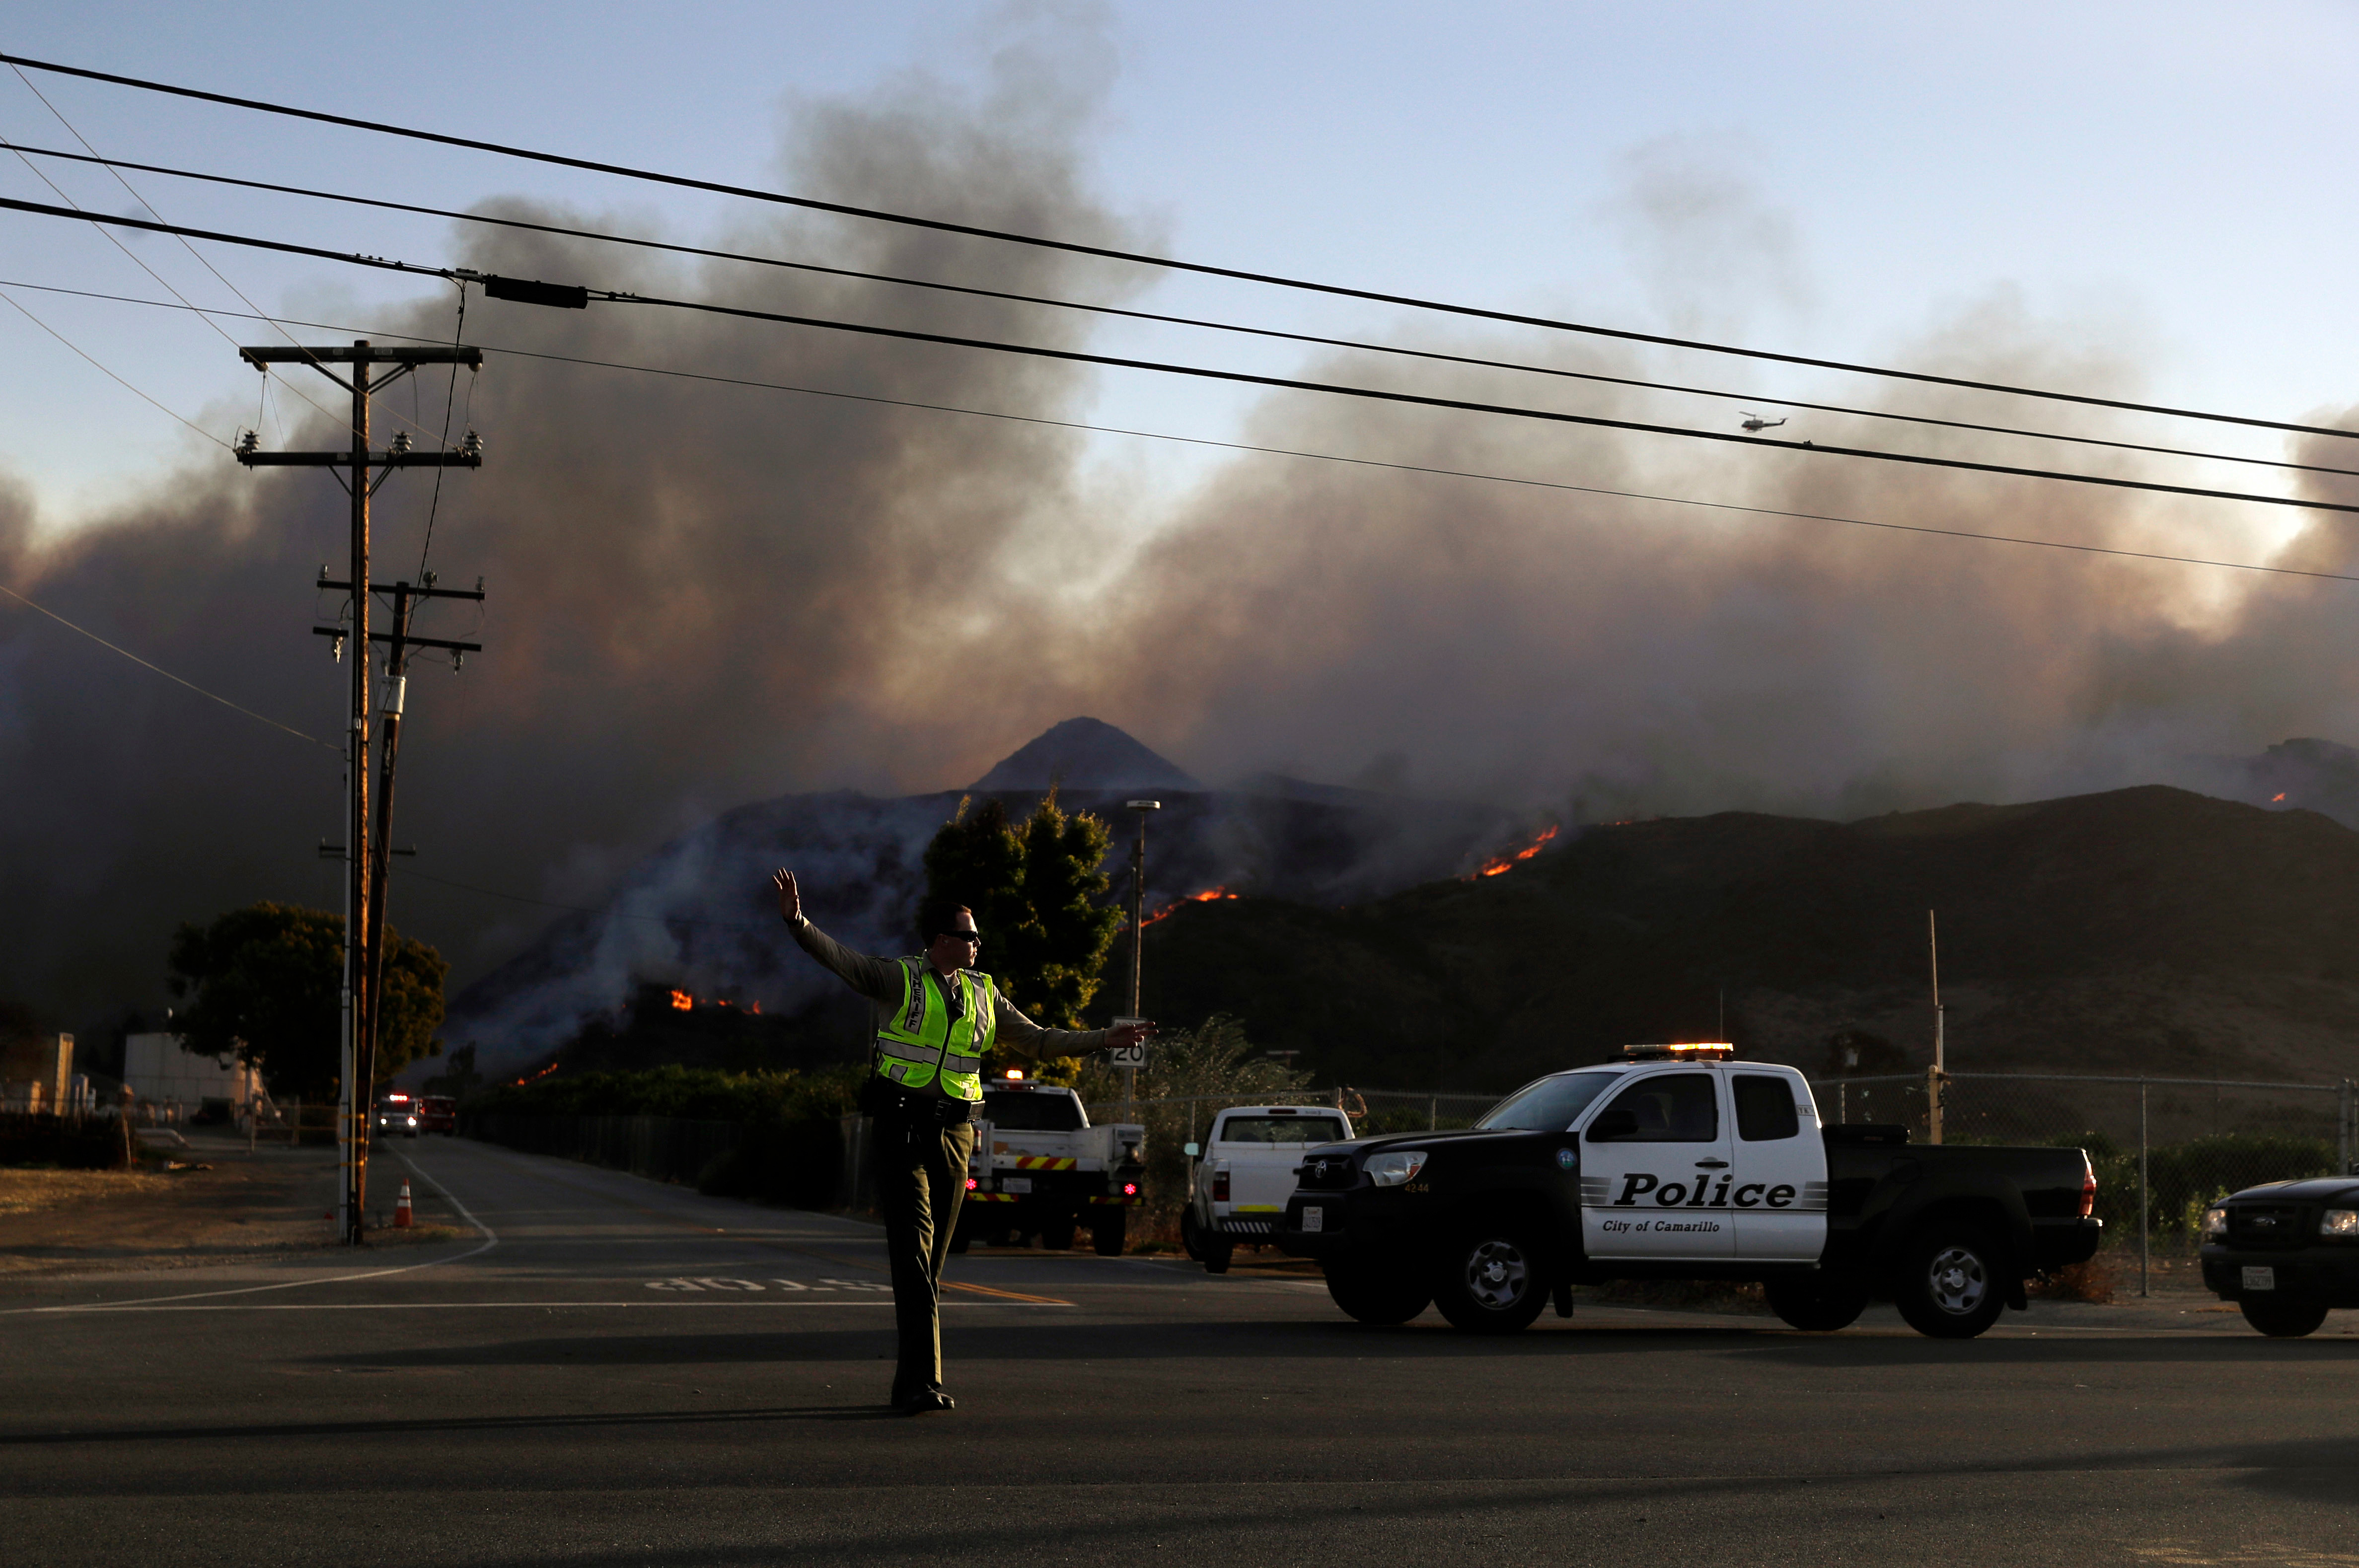 A police officer mans a checkpoint in front of an advancing wildfire, near Newbury Park, Calif. onNov. 9, 2018. The Ventura County Fire Department has also ordered evacuation of some communities in the path of the fire, which erupted a few miles from the site of Wednesday night's deadly mass shooting at a Thousand Oaks bar. (Marcio Jose Sanchez—AP/REX/Shutterstock)